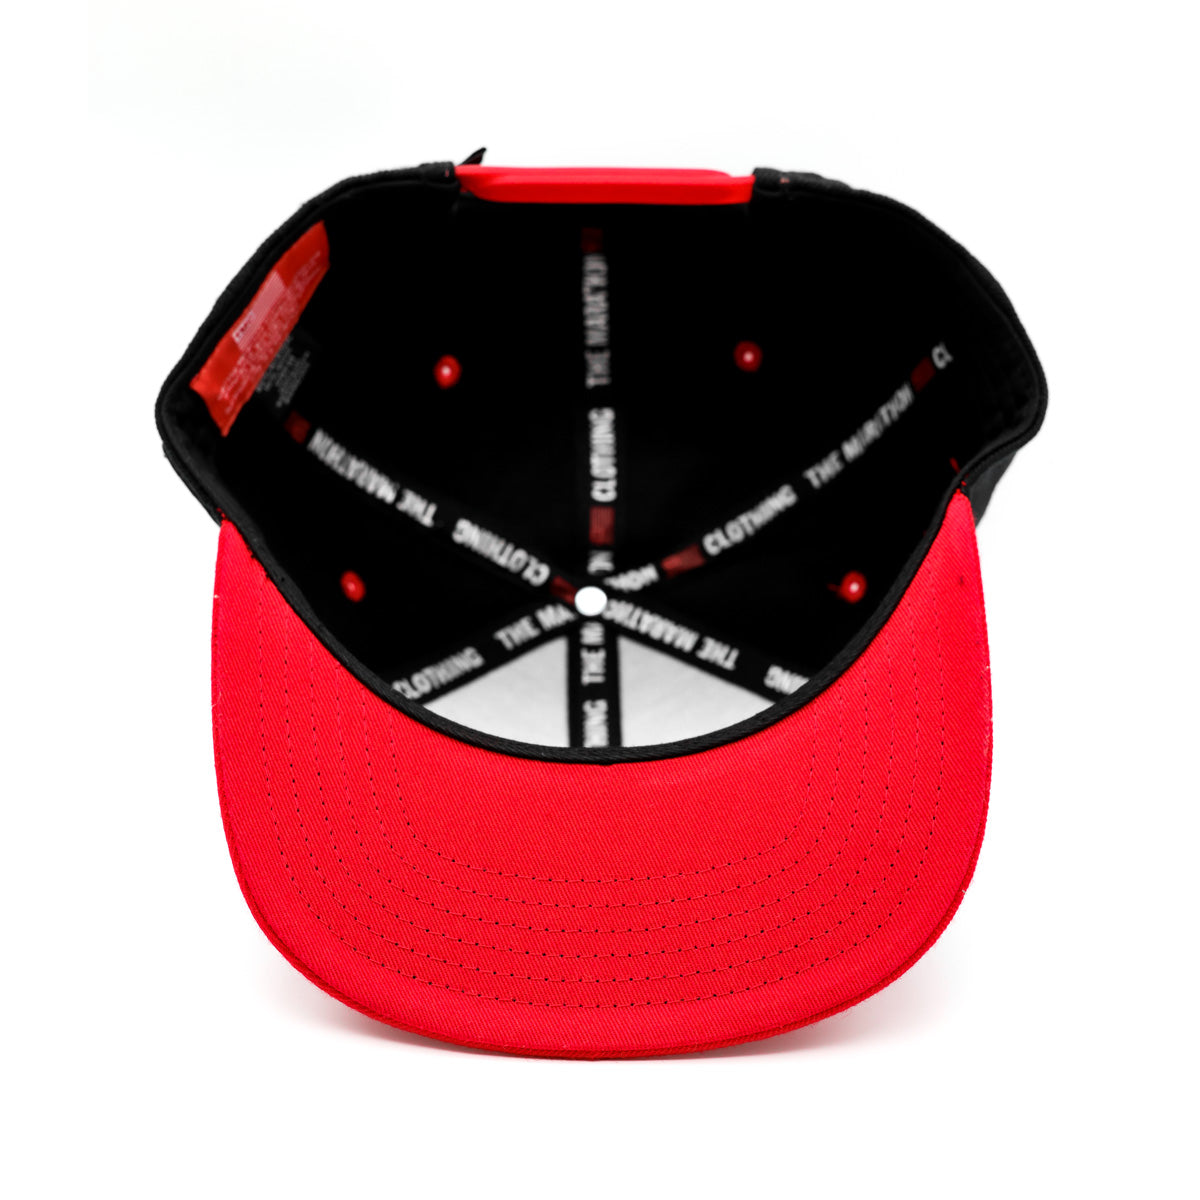 Crenshaw Limited Edition Snapback - Black/Red [Two-Tone] - Interior